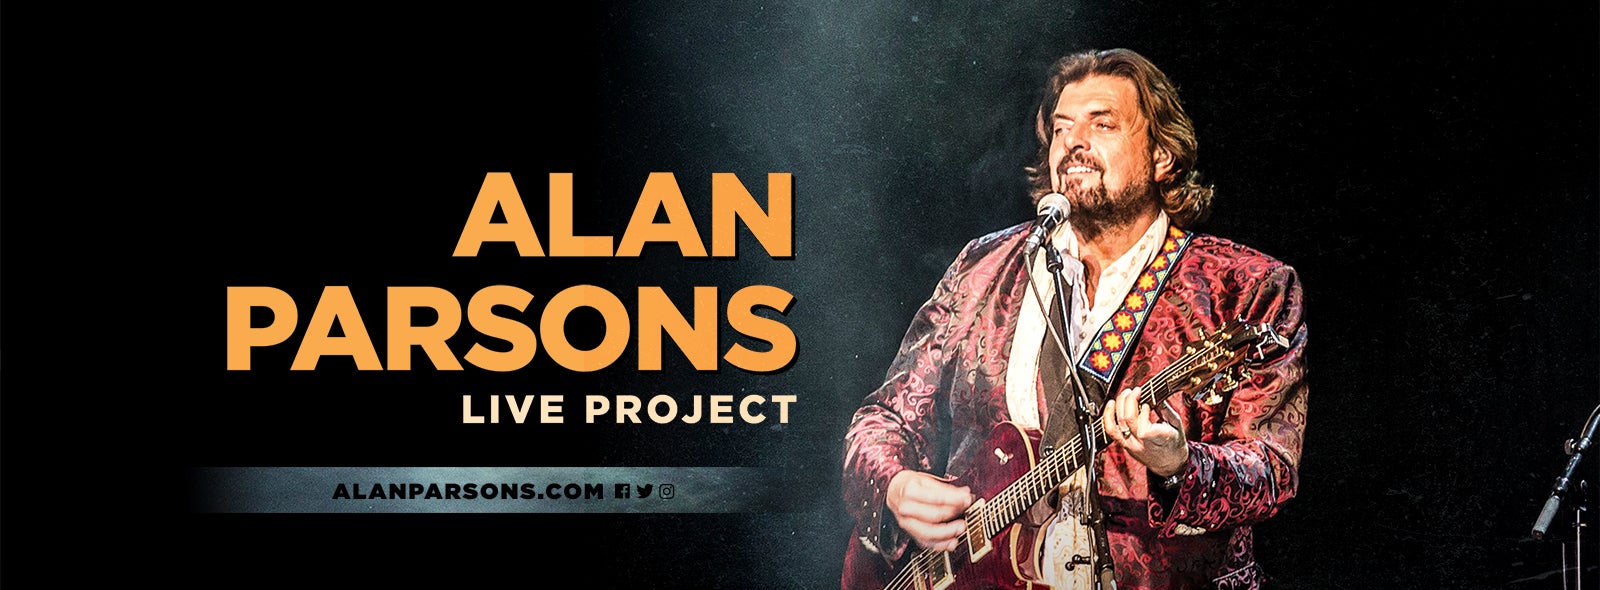 the alan parsons live project